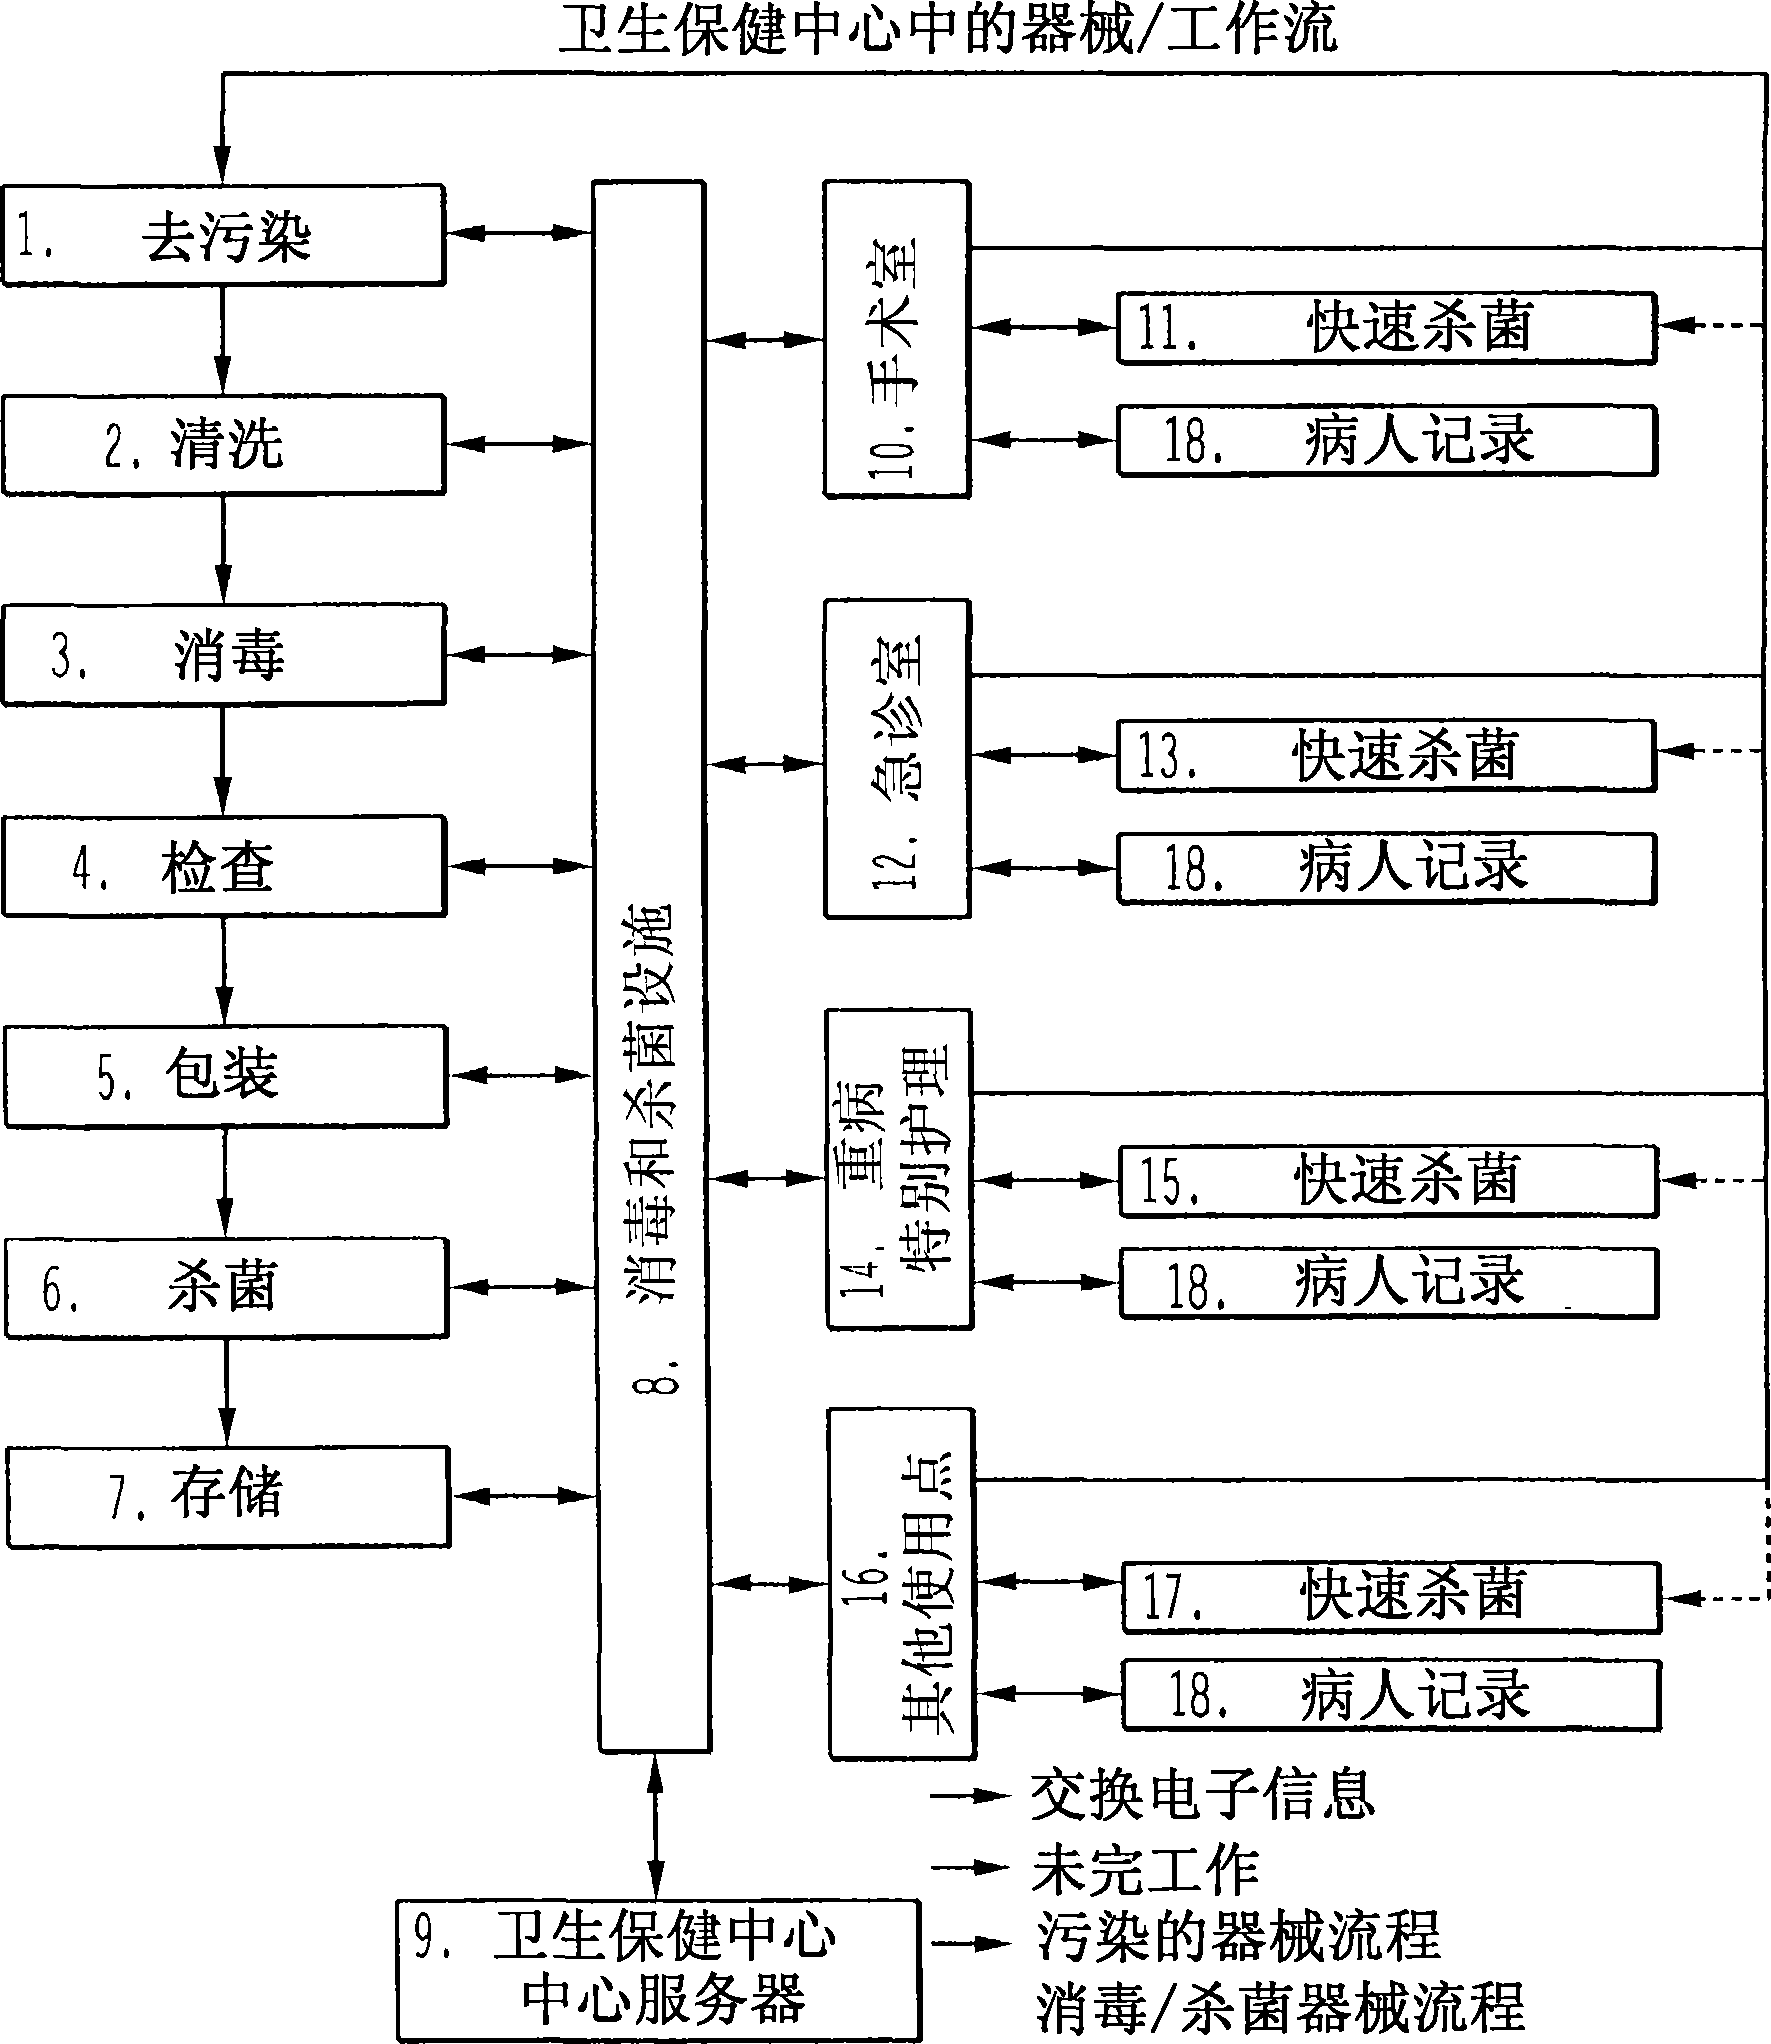 System for management of processed instruments